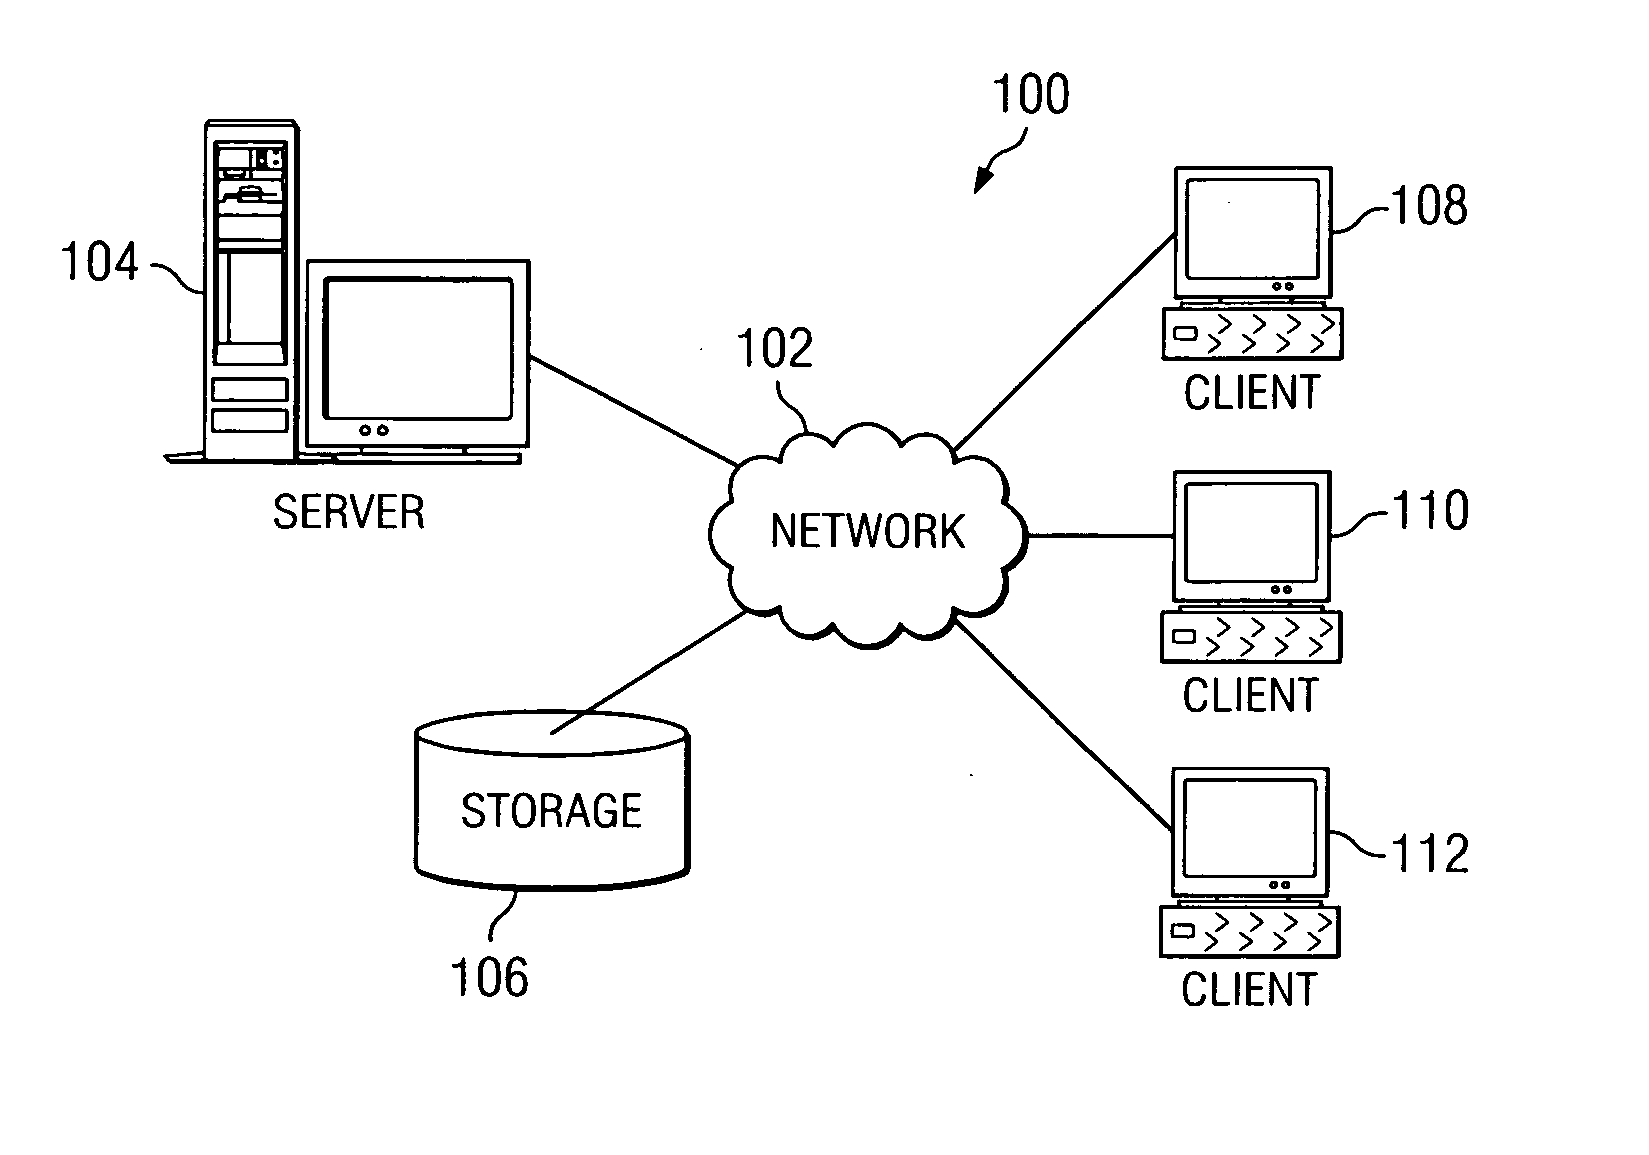 Reference monitor system and method for enforcing information flow policies